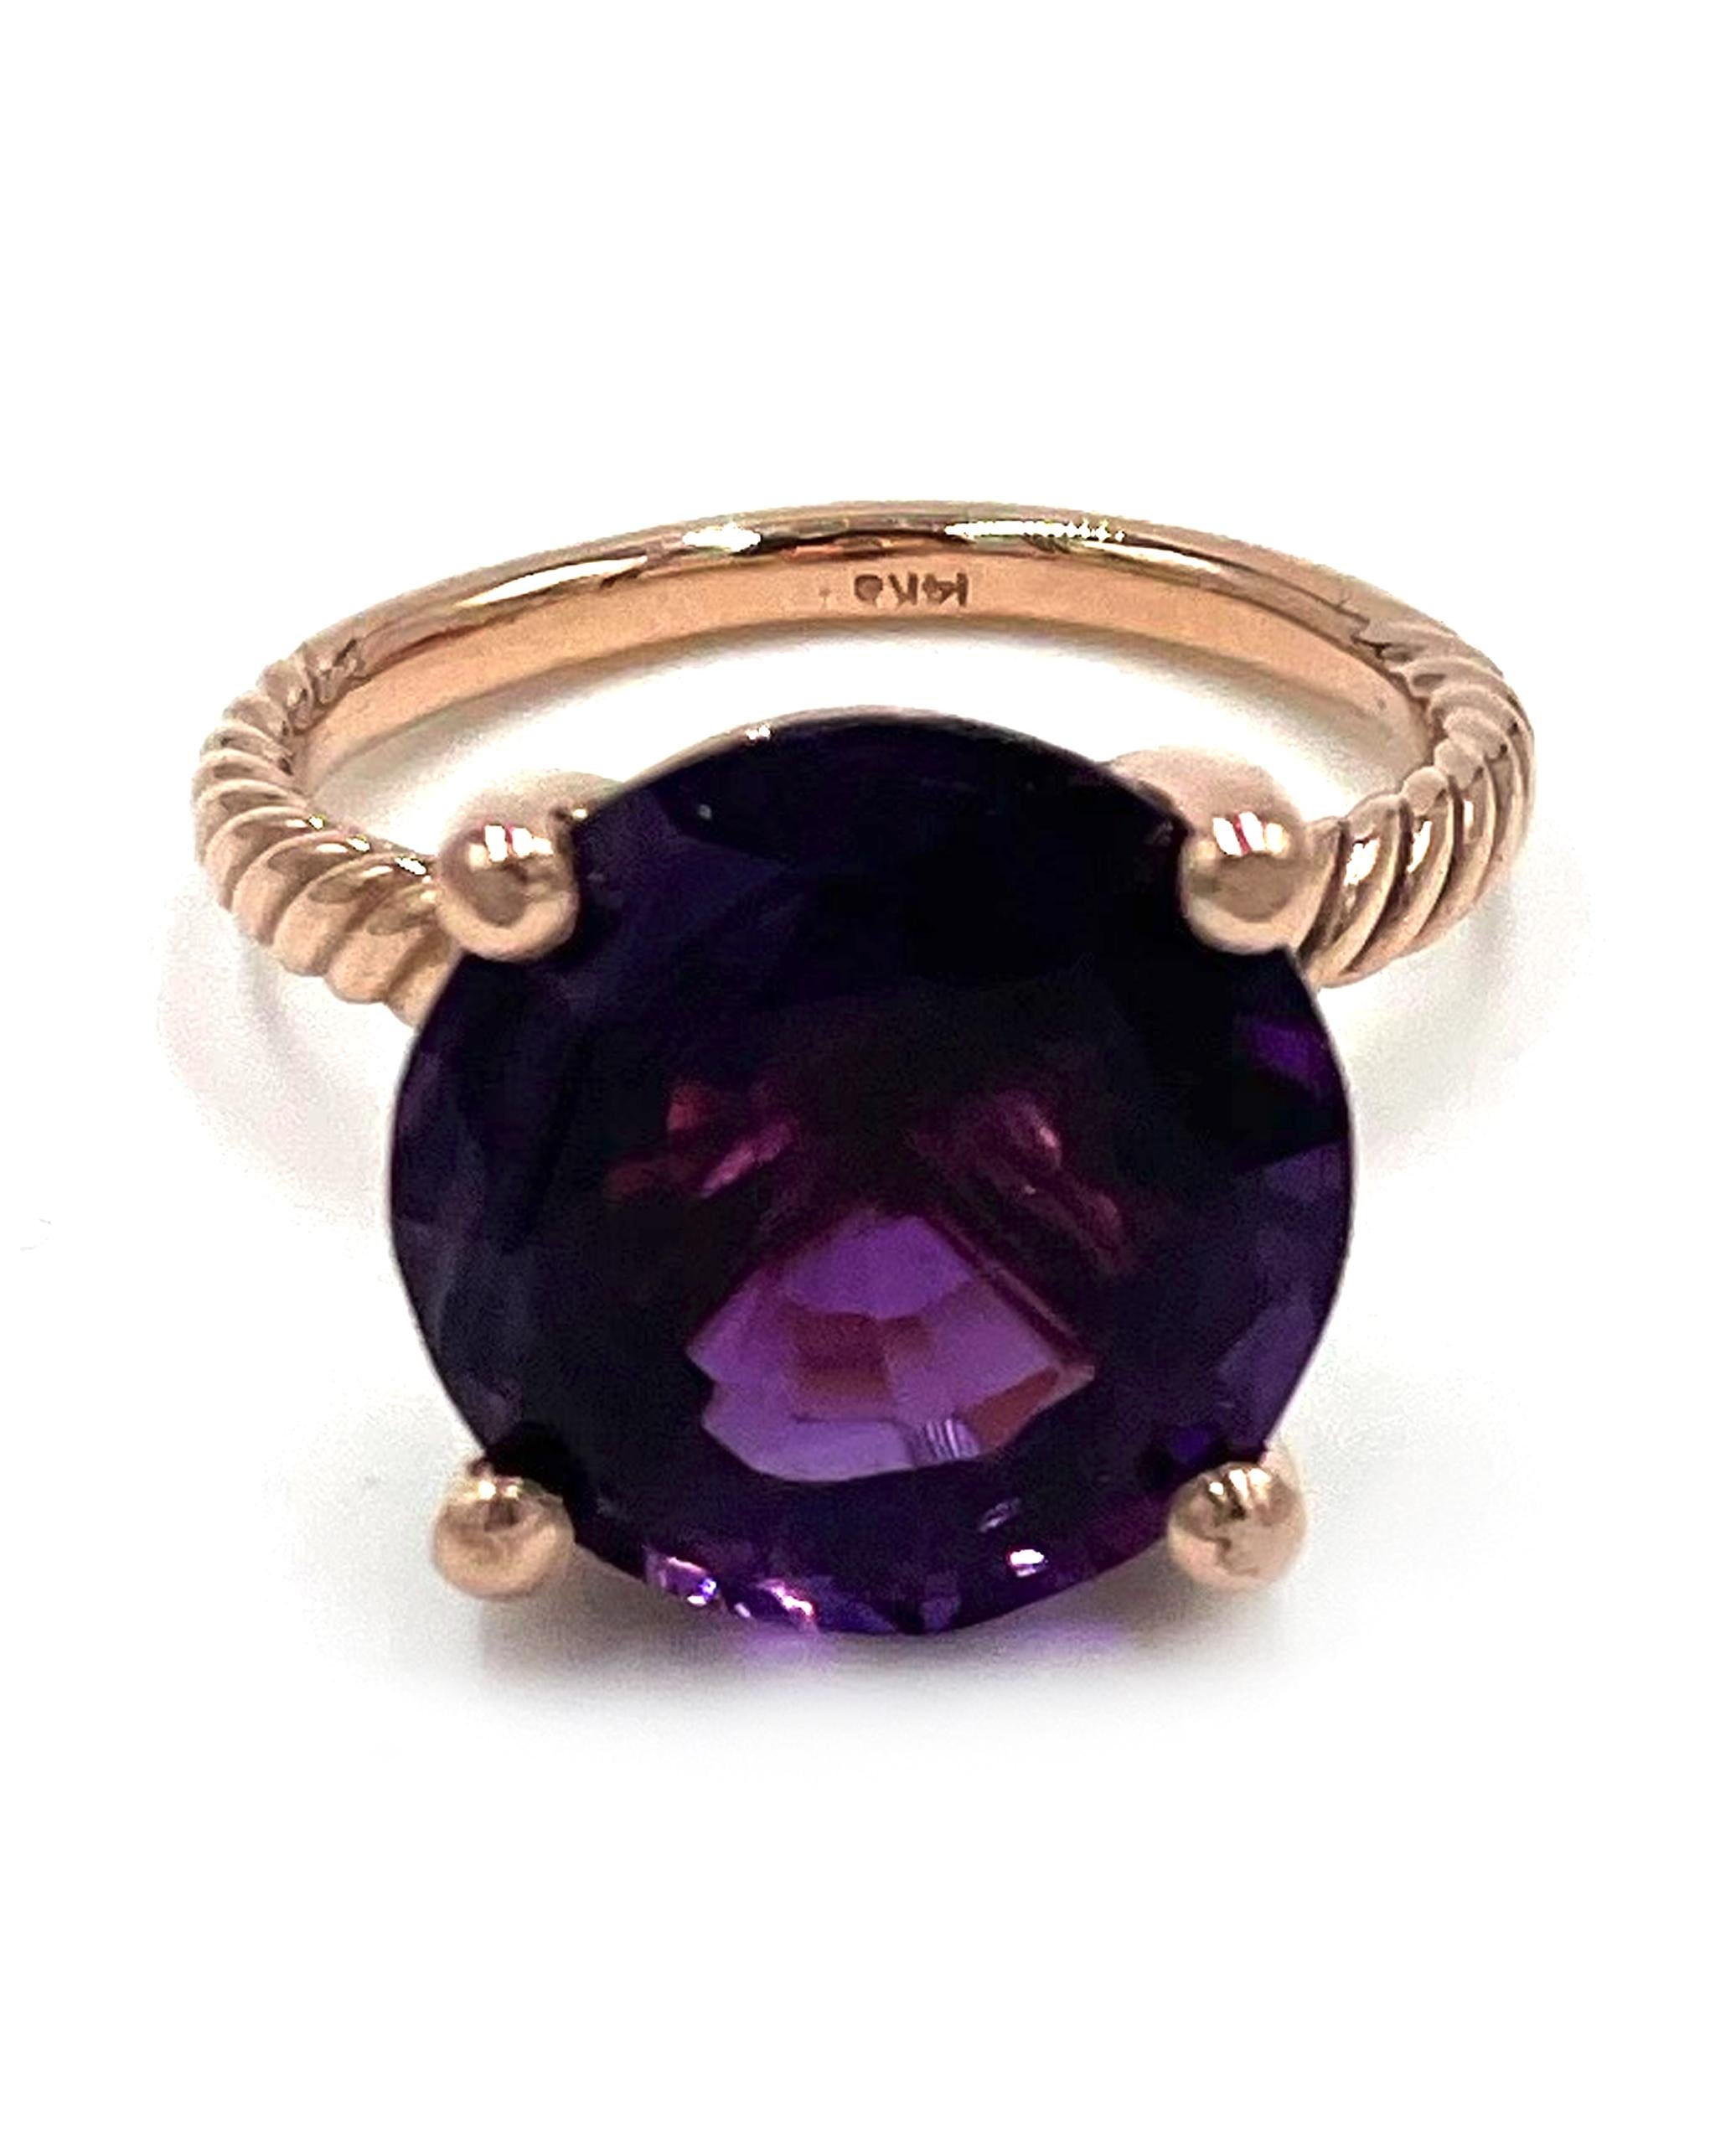 14K rose gold rope style solitaire ring set in four prongs with one round faceted amethyst weighing 10.00 carats.

* Amethyst dimensions: Approximately 14.00x14.07mm
* Shank width is 2.5mm and tapers down to 2mm
* Finger size 7 (can be sized)